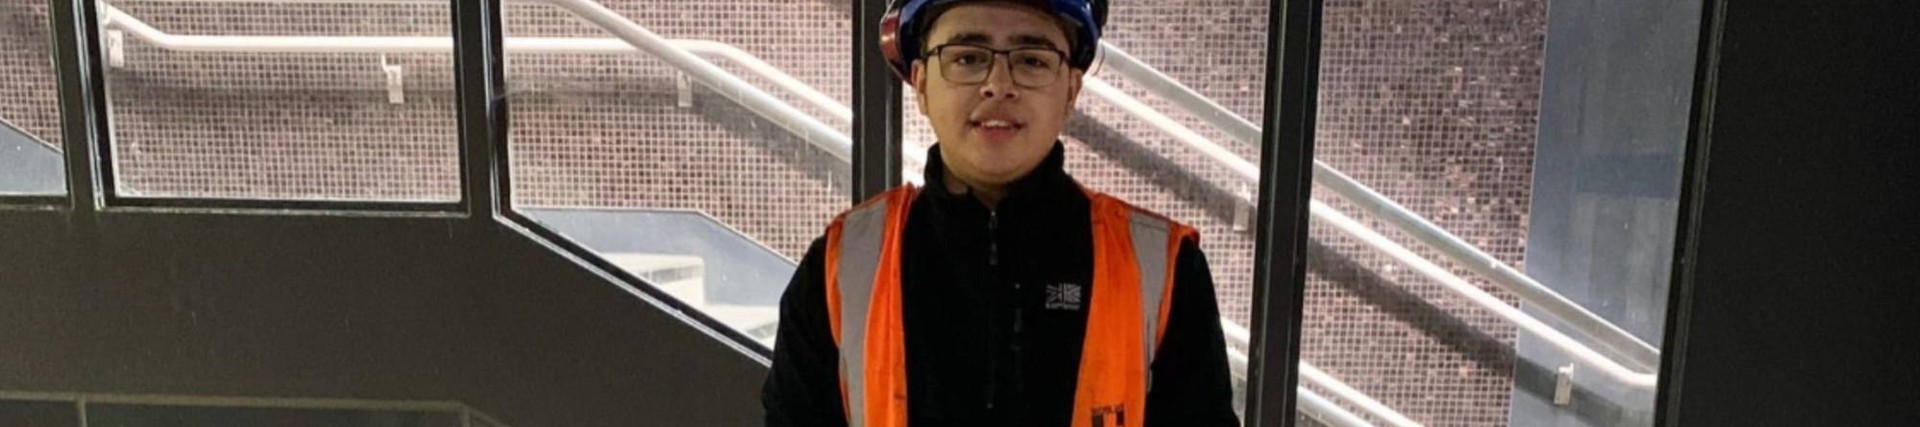 Rail apprentice Aaron Porter on Morson and Transport for London's Mentoring Circles